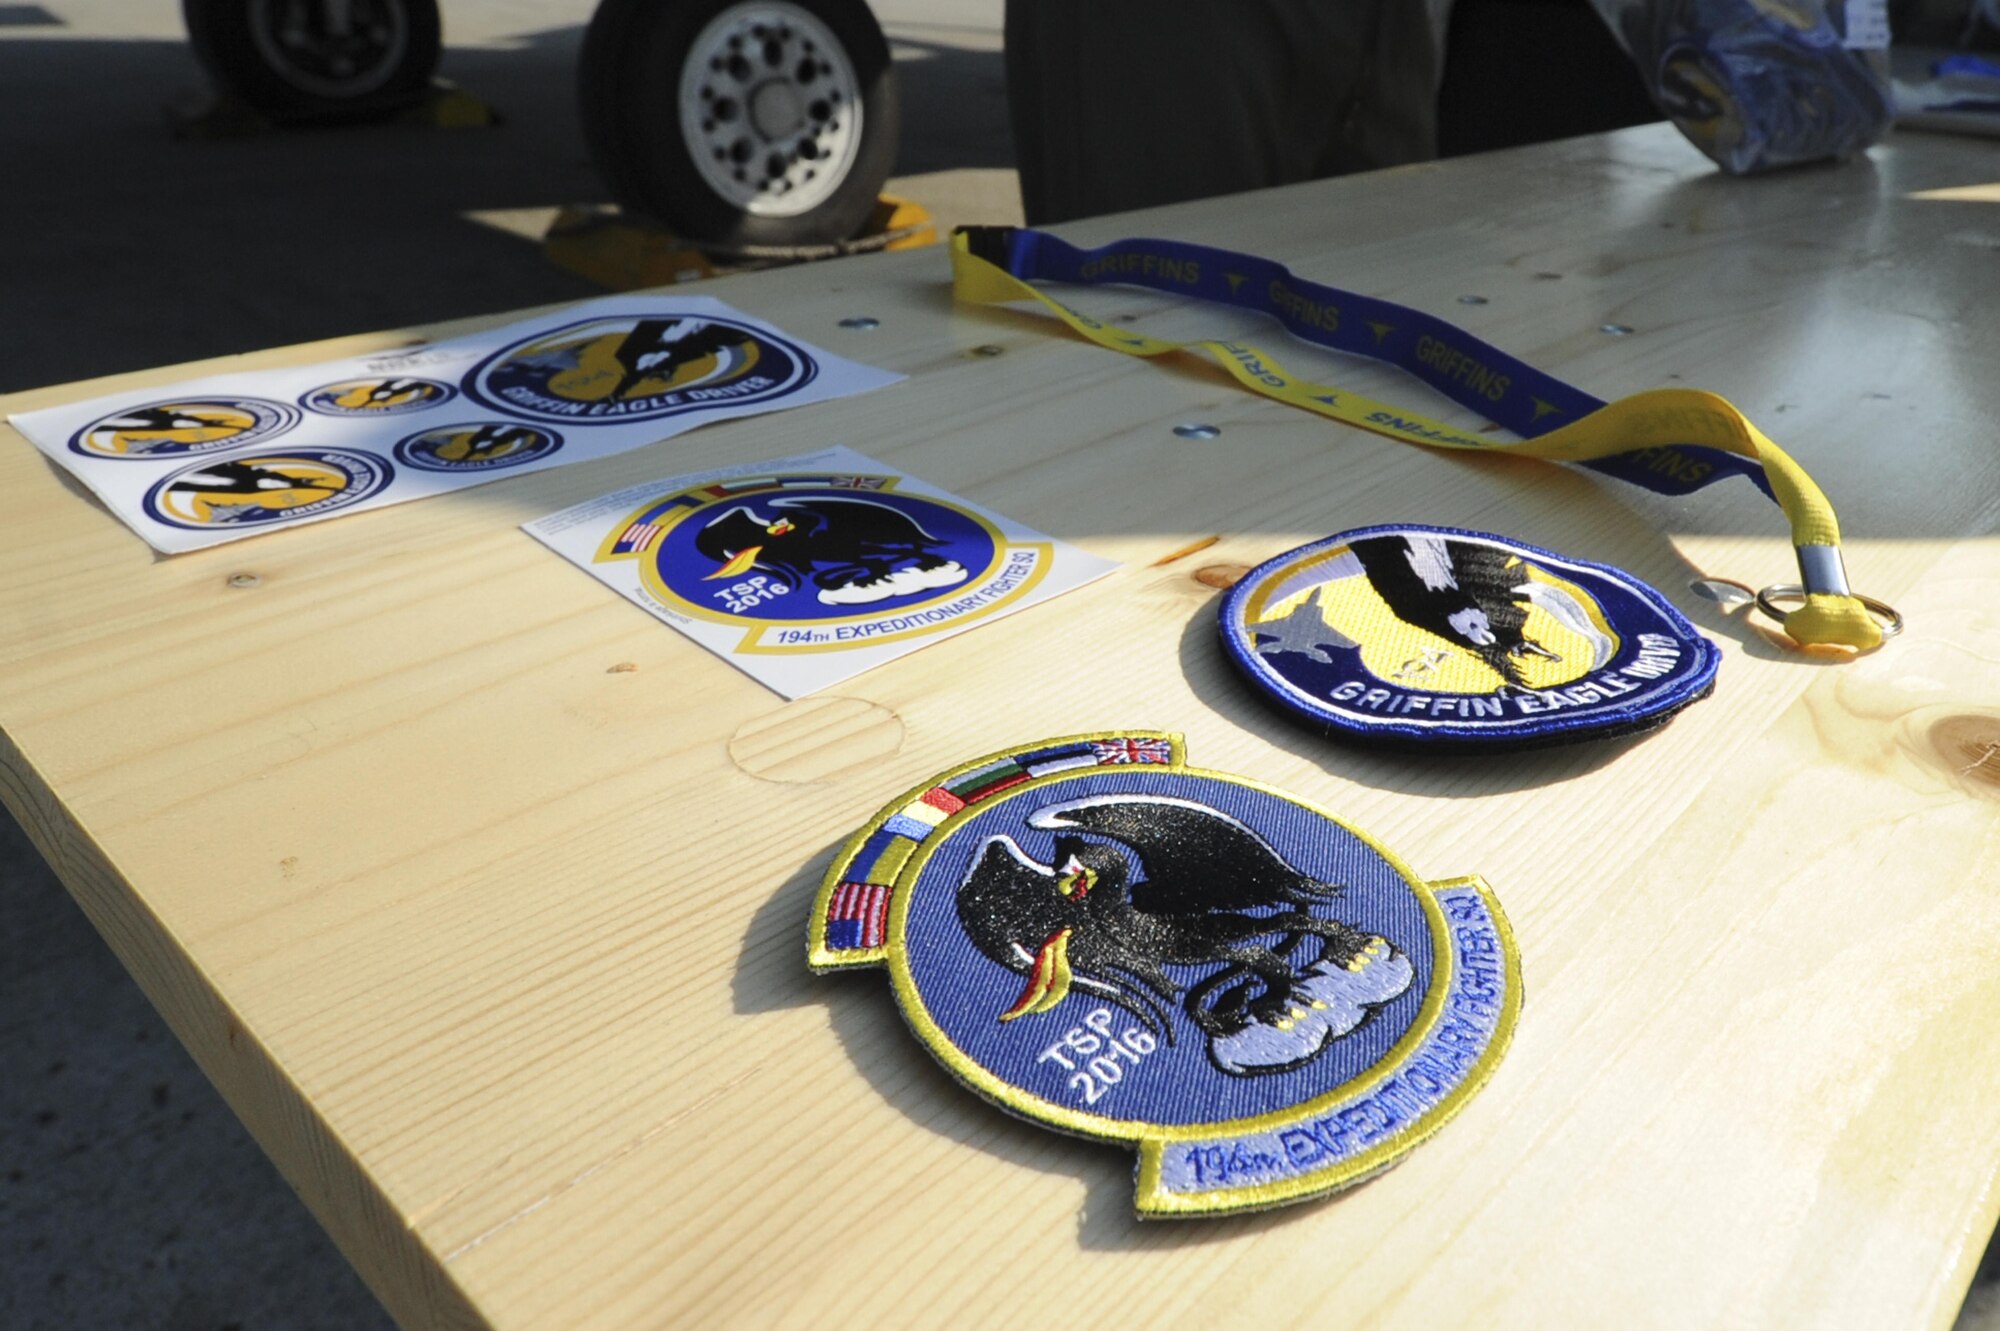 A collection of patches, stickers and lanyards emblazoned with the 194th Expeditionary Fighter Squadron logo rest on a table during the Romanian air force's 71st Air Base's air show and open house at Campia Turzii, Romania, July 23, 2016. The aviation demonstration took place during the middle of the 194th EFS' six-month long theater security package deployment to Europe in support of Operation Atlantic Resolve, which aims to bolster the U.S.'s continued commitment to the collective security of NATO and dedication to the enduring peace and stability in the region. The unit, comprised of more than 200 CANG Airmen from the 144th Fighter Wing at Fresno ANG Base, Calif., as well as U.S. Air Force Airmen from the 52nd Fighter Wing at Spangdahlem Air Base, Germany, piloted, maintained and supported the deployment of 12 F-15Cs Eagle fighter aircraft throughout nations like Romania, Iceland, the United Kingdom, the Netherlands, Estonia and among others. The F-15Cs took to the skies alongside the 71st AB's MiG-21 fighter aircraft and Puma helicopters for both the airshow, the second engagement of its kind at Campia Turzii under Operation Atlantic Resolve, and the bilateral flight training, also known as Dacian Eagle 2016. (U.S. Air Force photo by Staff Sgt. Joe W. McFadden/Released)